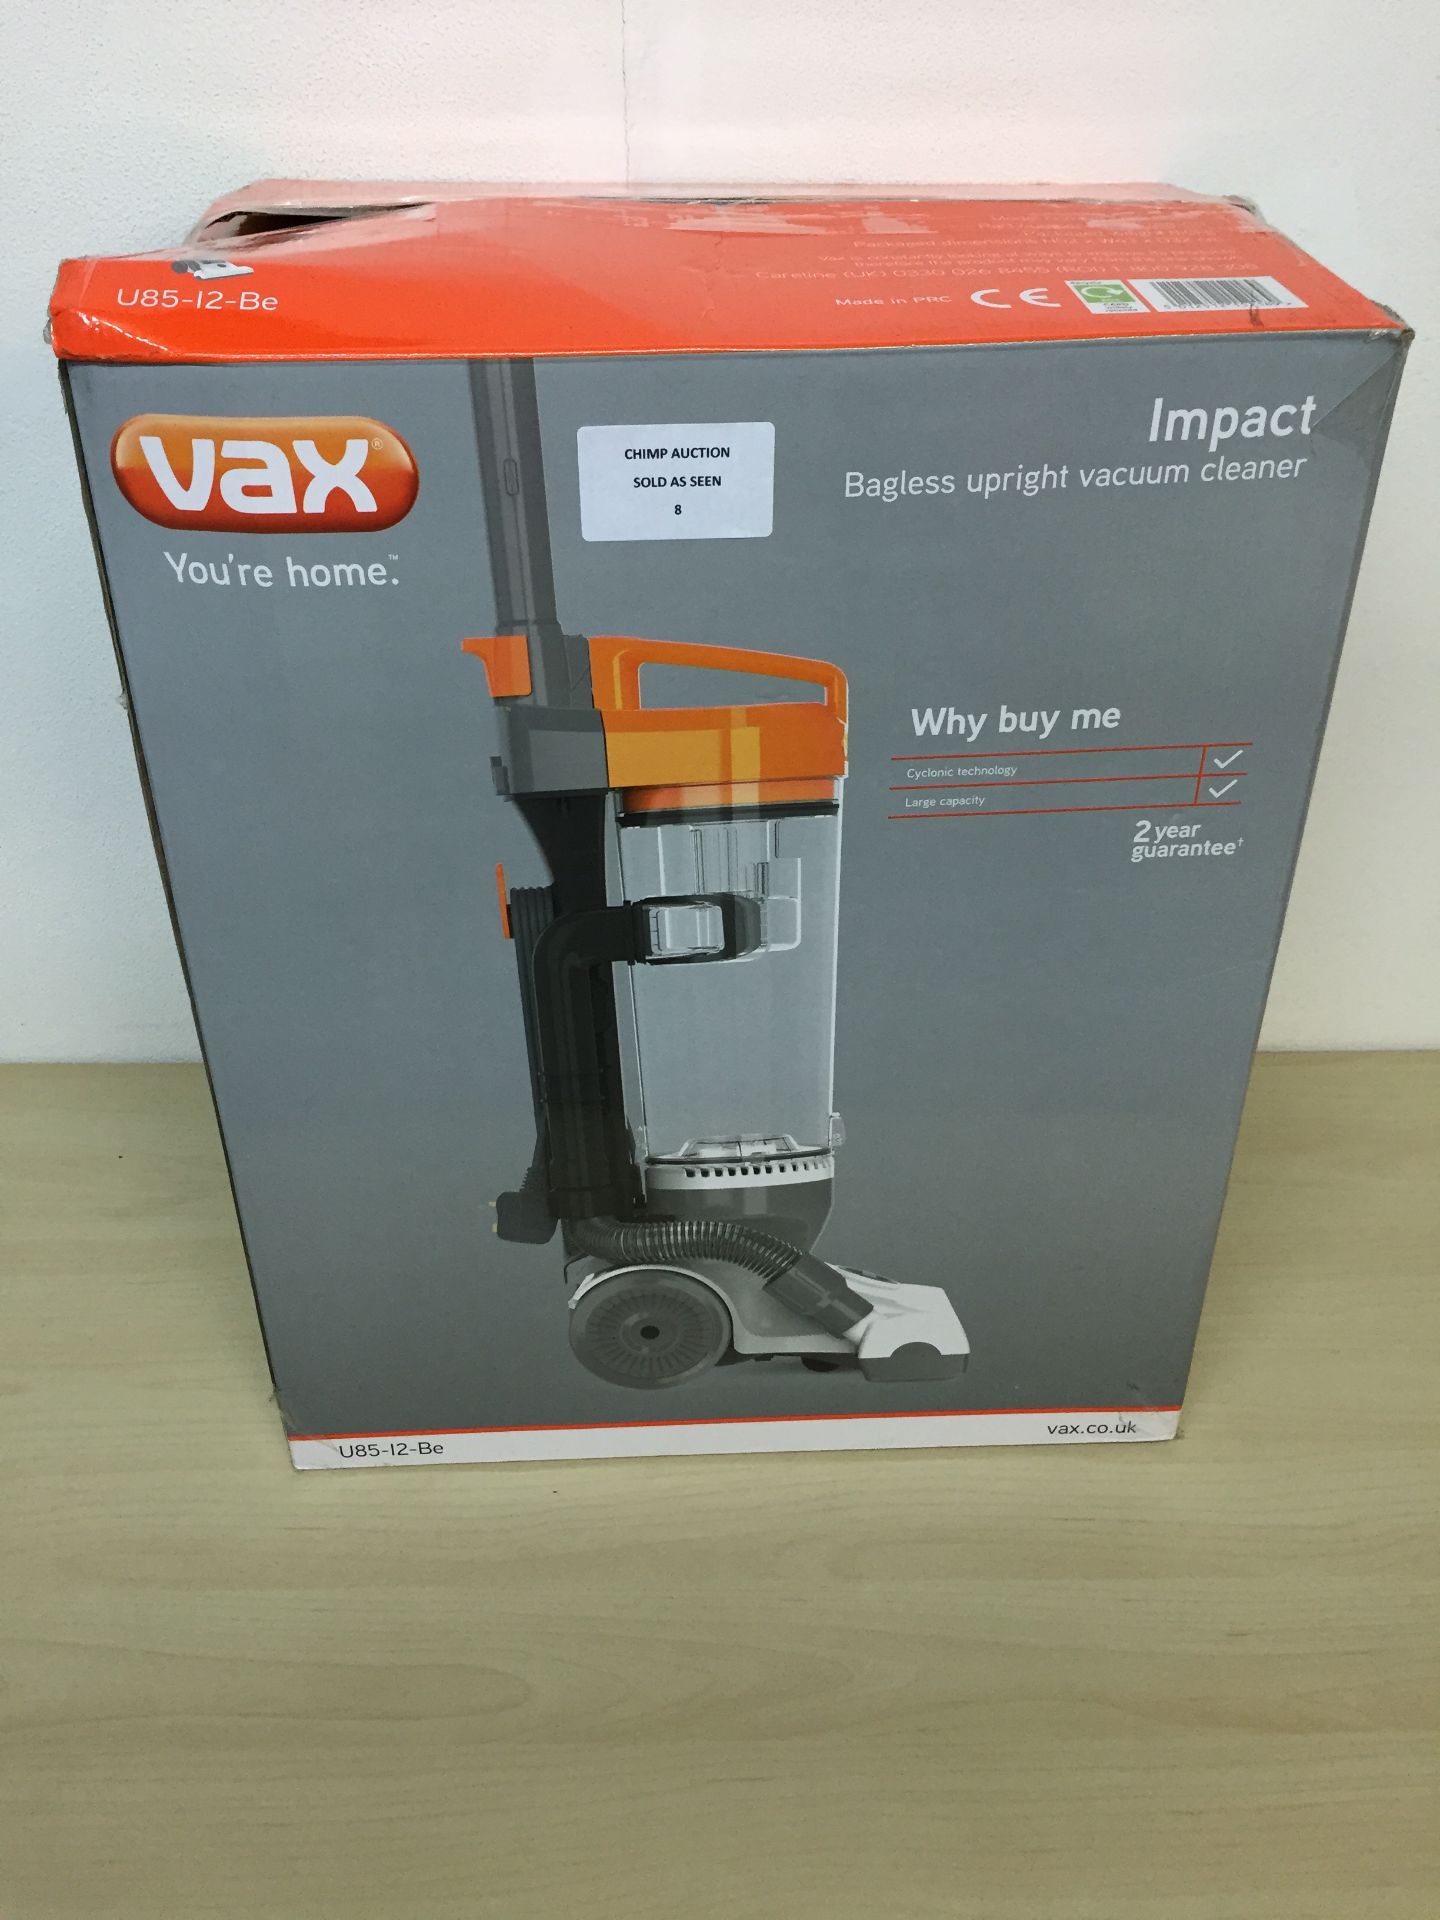 BOXED Vax Impact Bagless Upright Vacuum Cleaner RRP £139.99